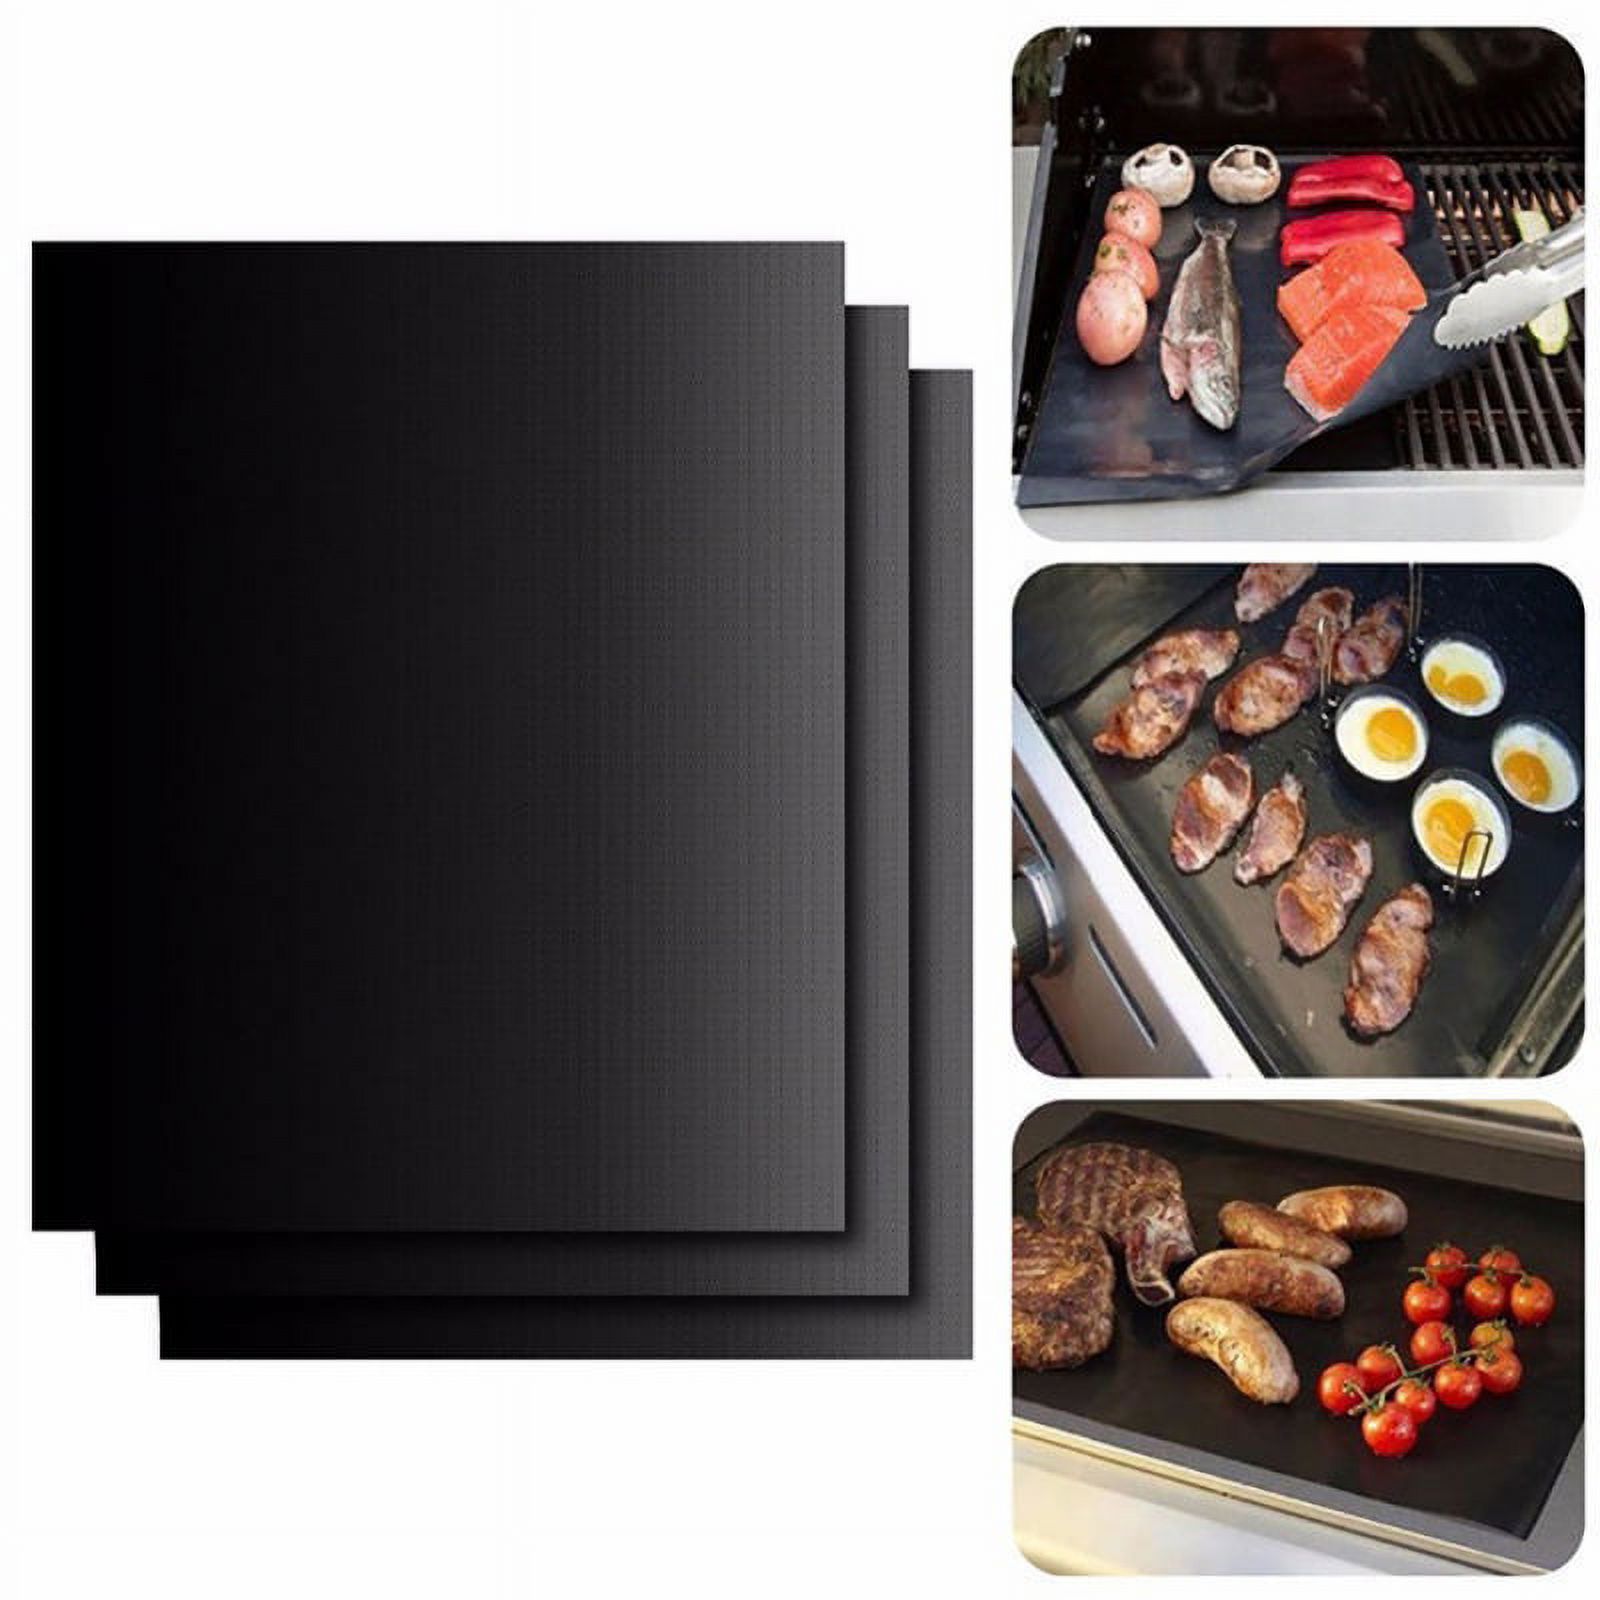 4Pcs/Pack Grill Mat BBQ Tool, Non-stick Reusable, For Food Heating, Grills and Ovens, 13*16" - image 1 of 8